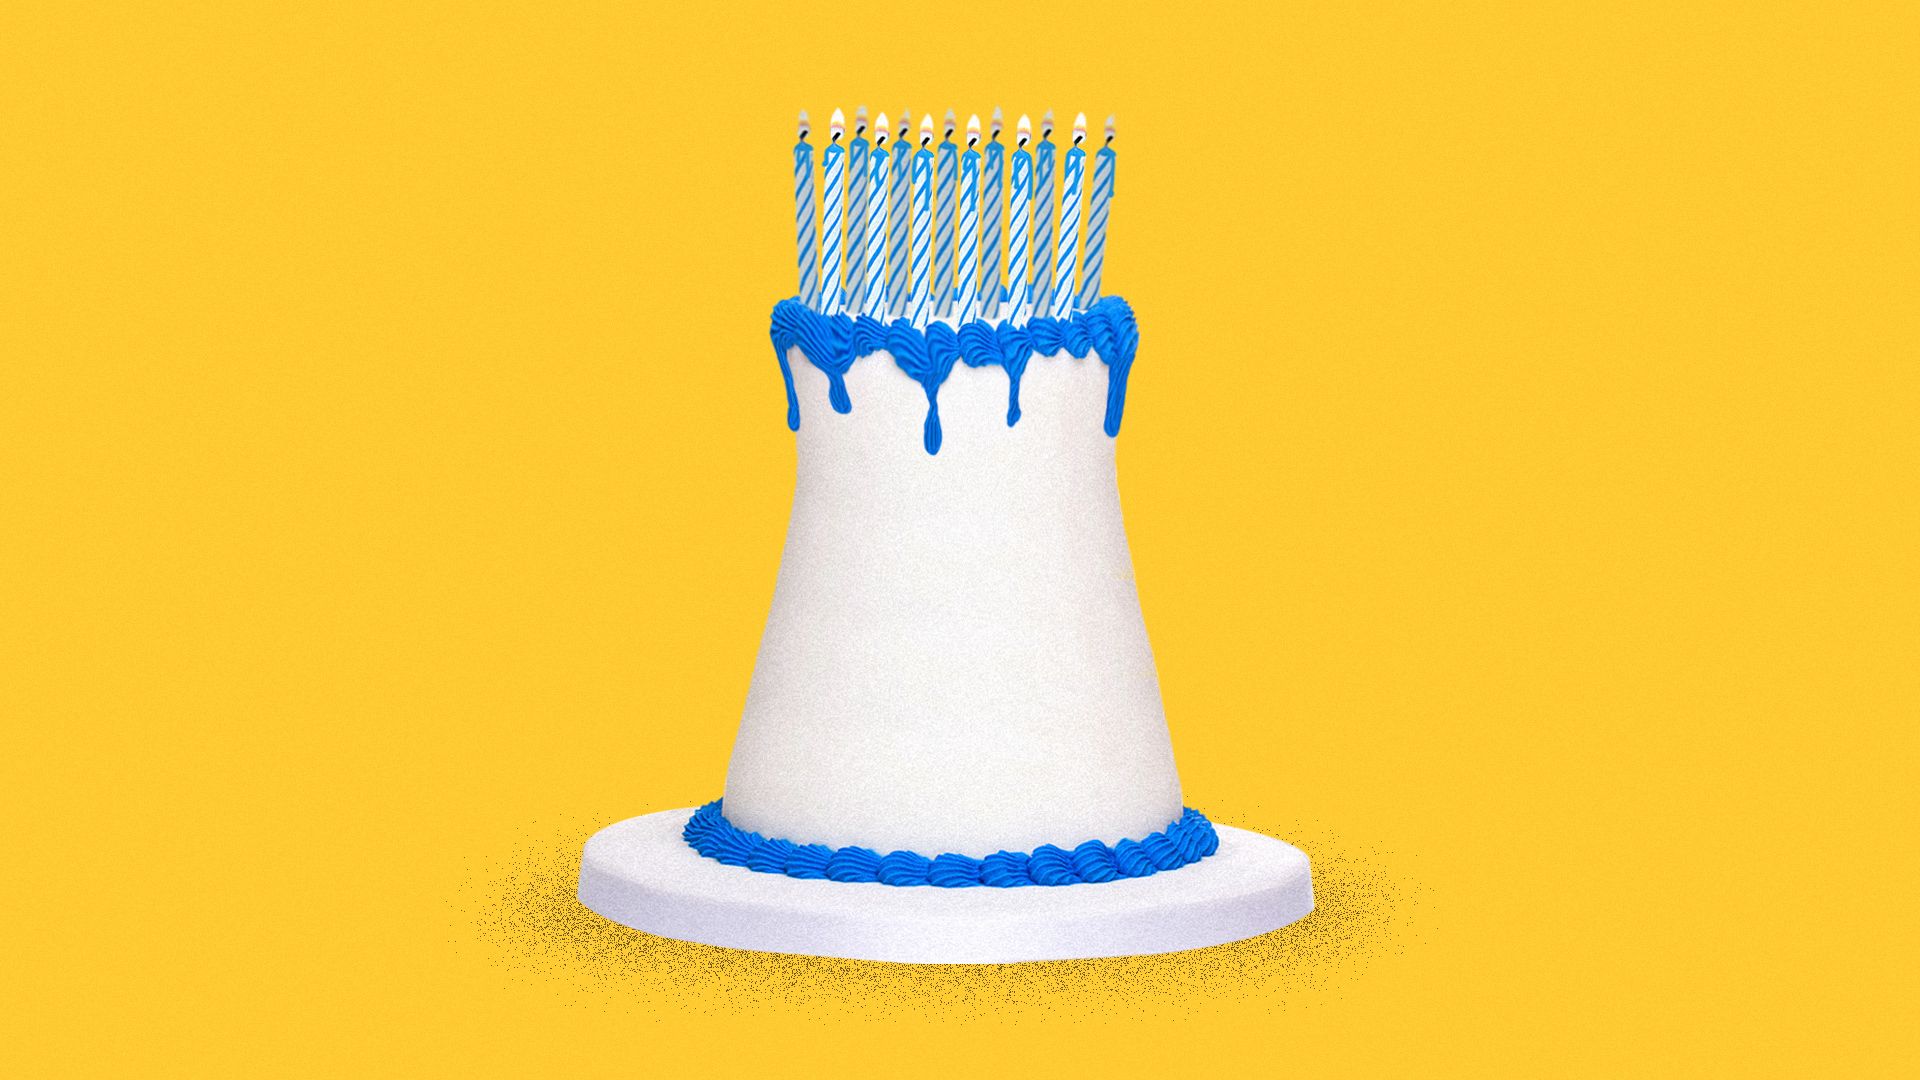 Illustration of a melting birthday cake in the shape of a nuclear tower with too many candles on top.